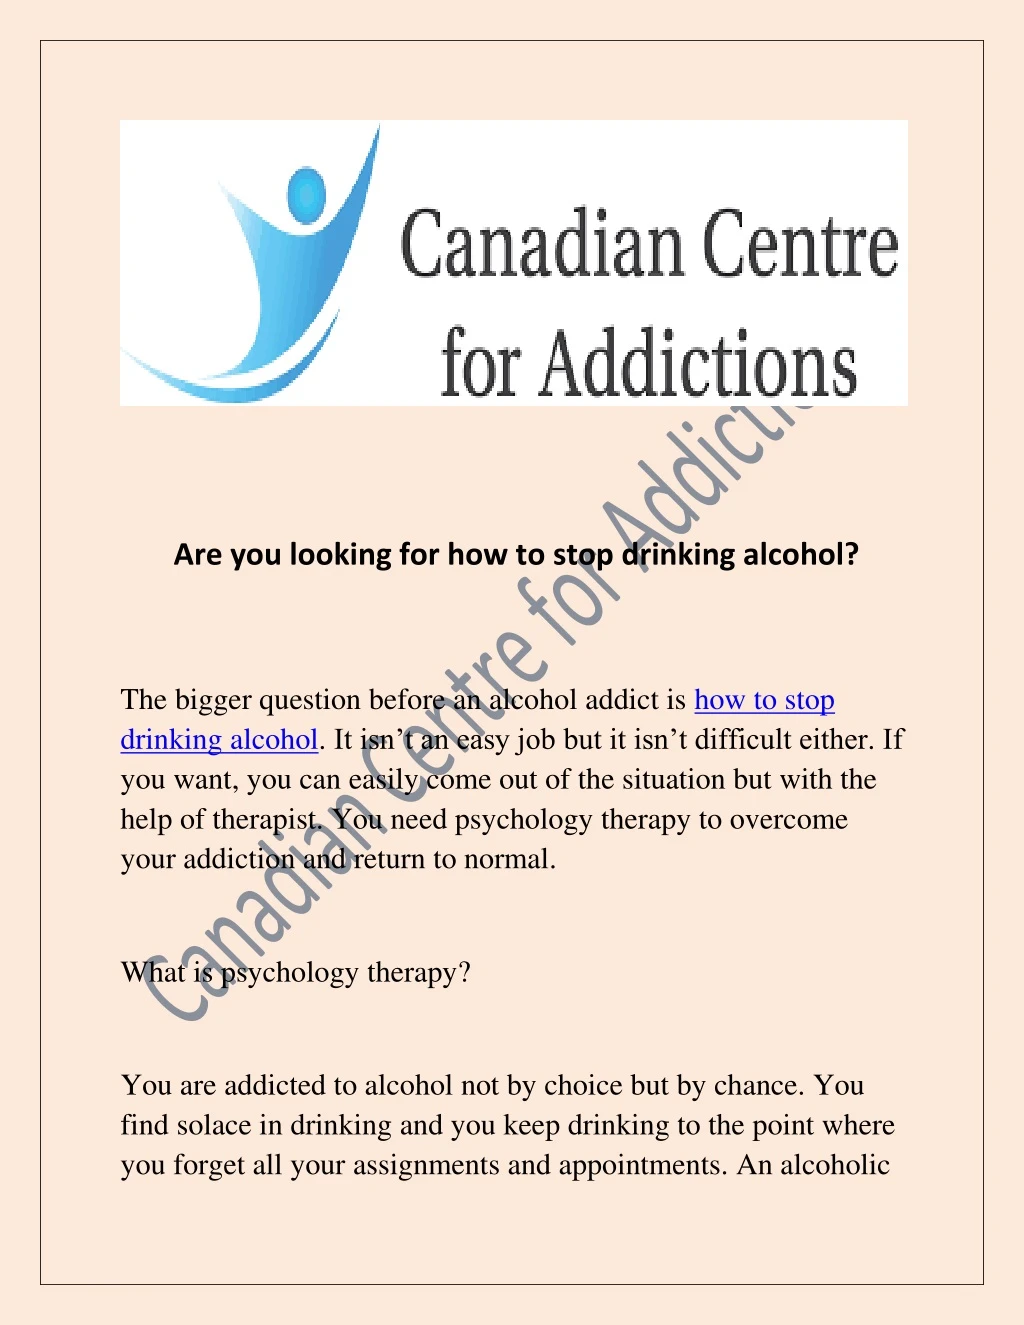 are you looking for how to stop drinking alcohol